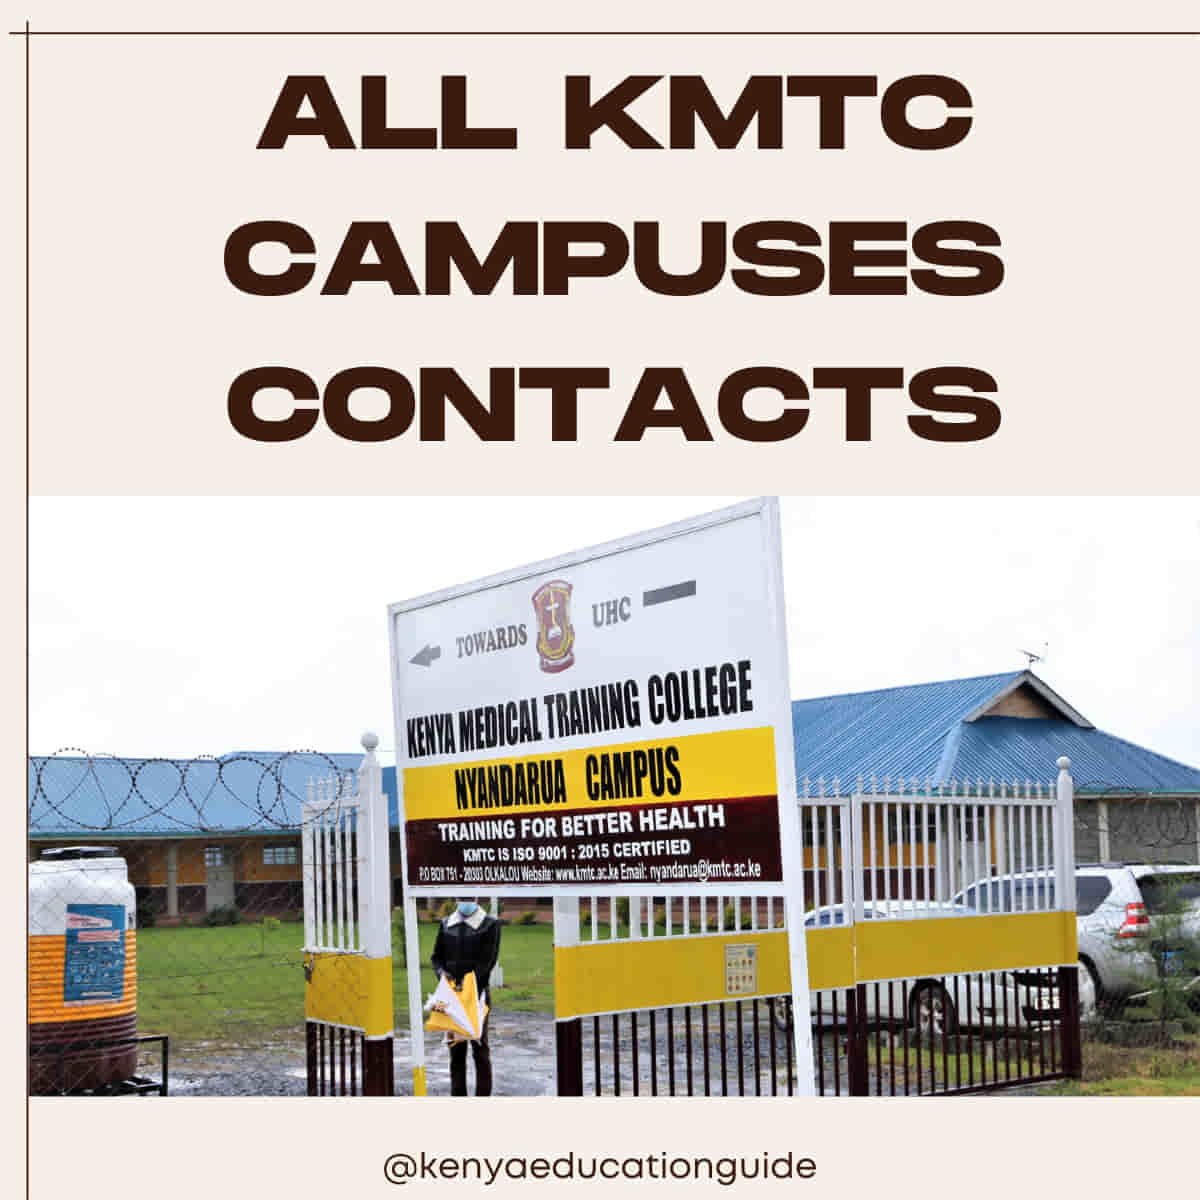 KMTC campuses contacts